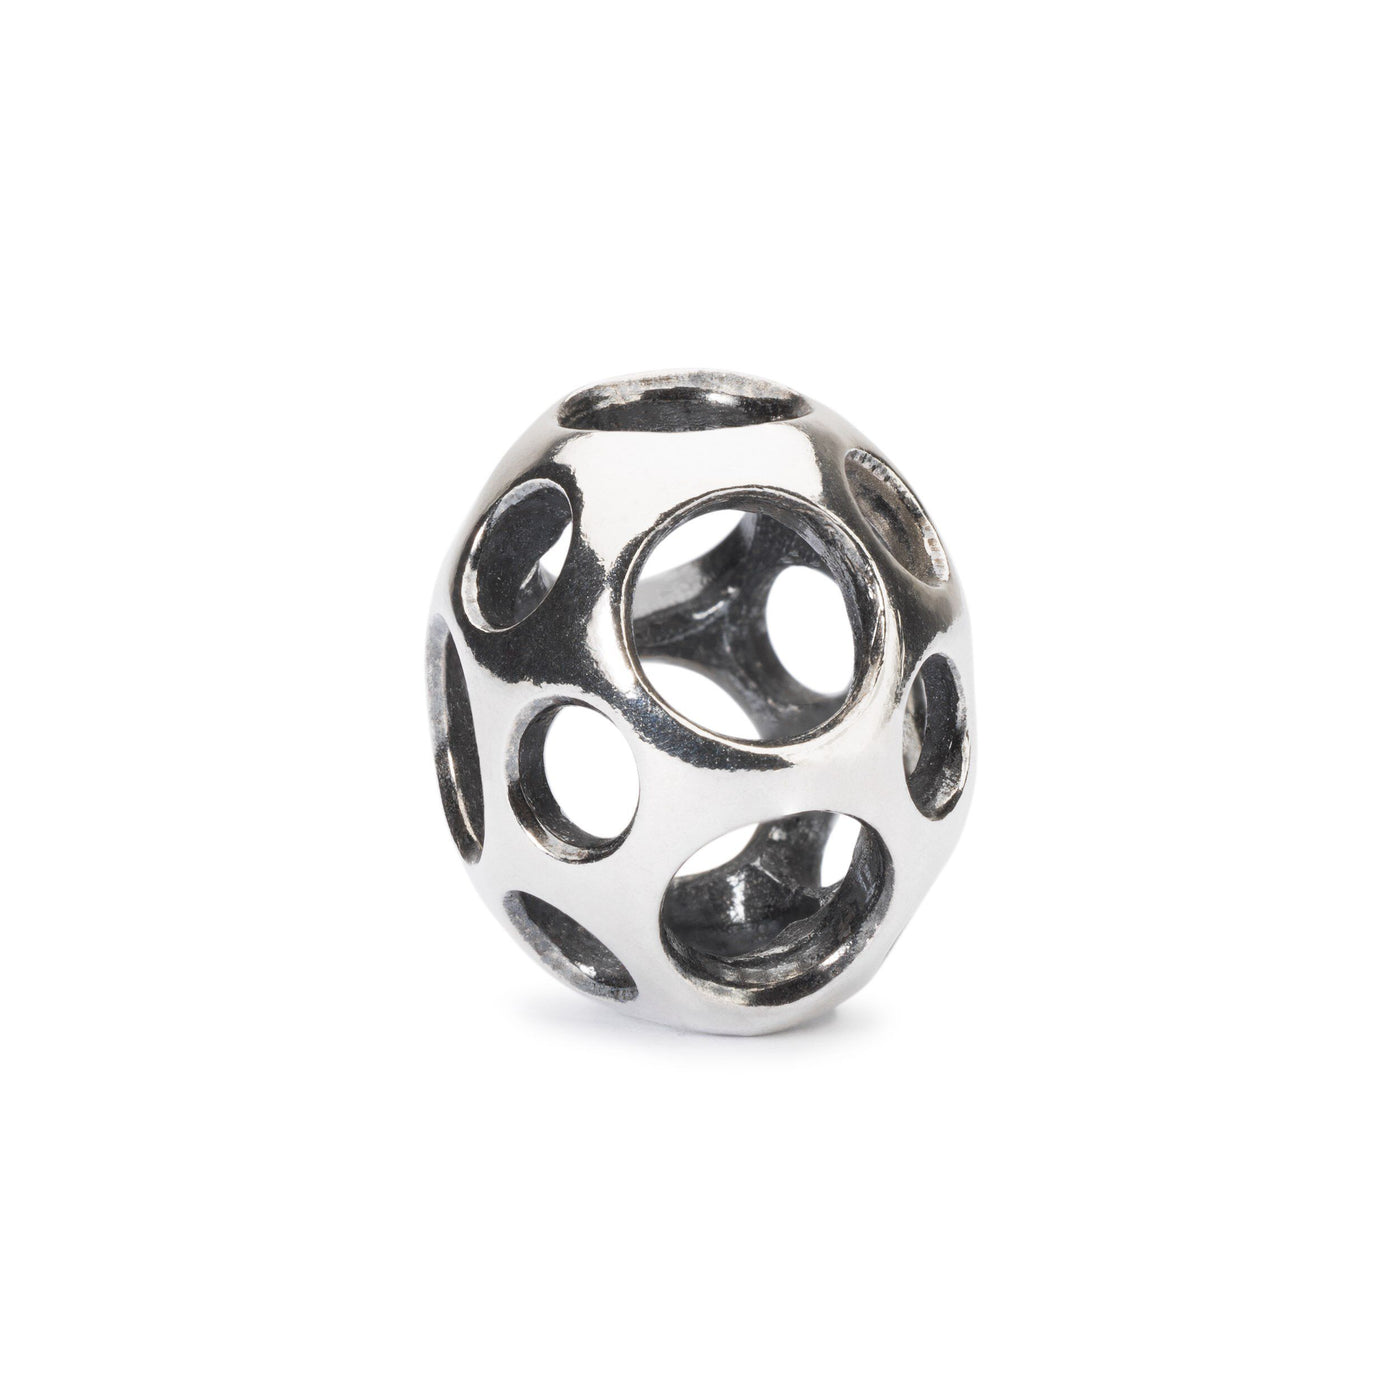 Puddles - Trollbeads Canada